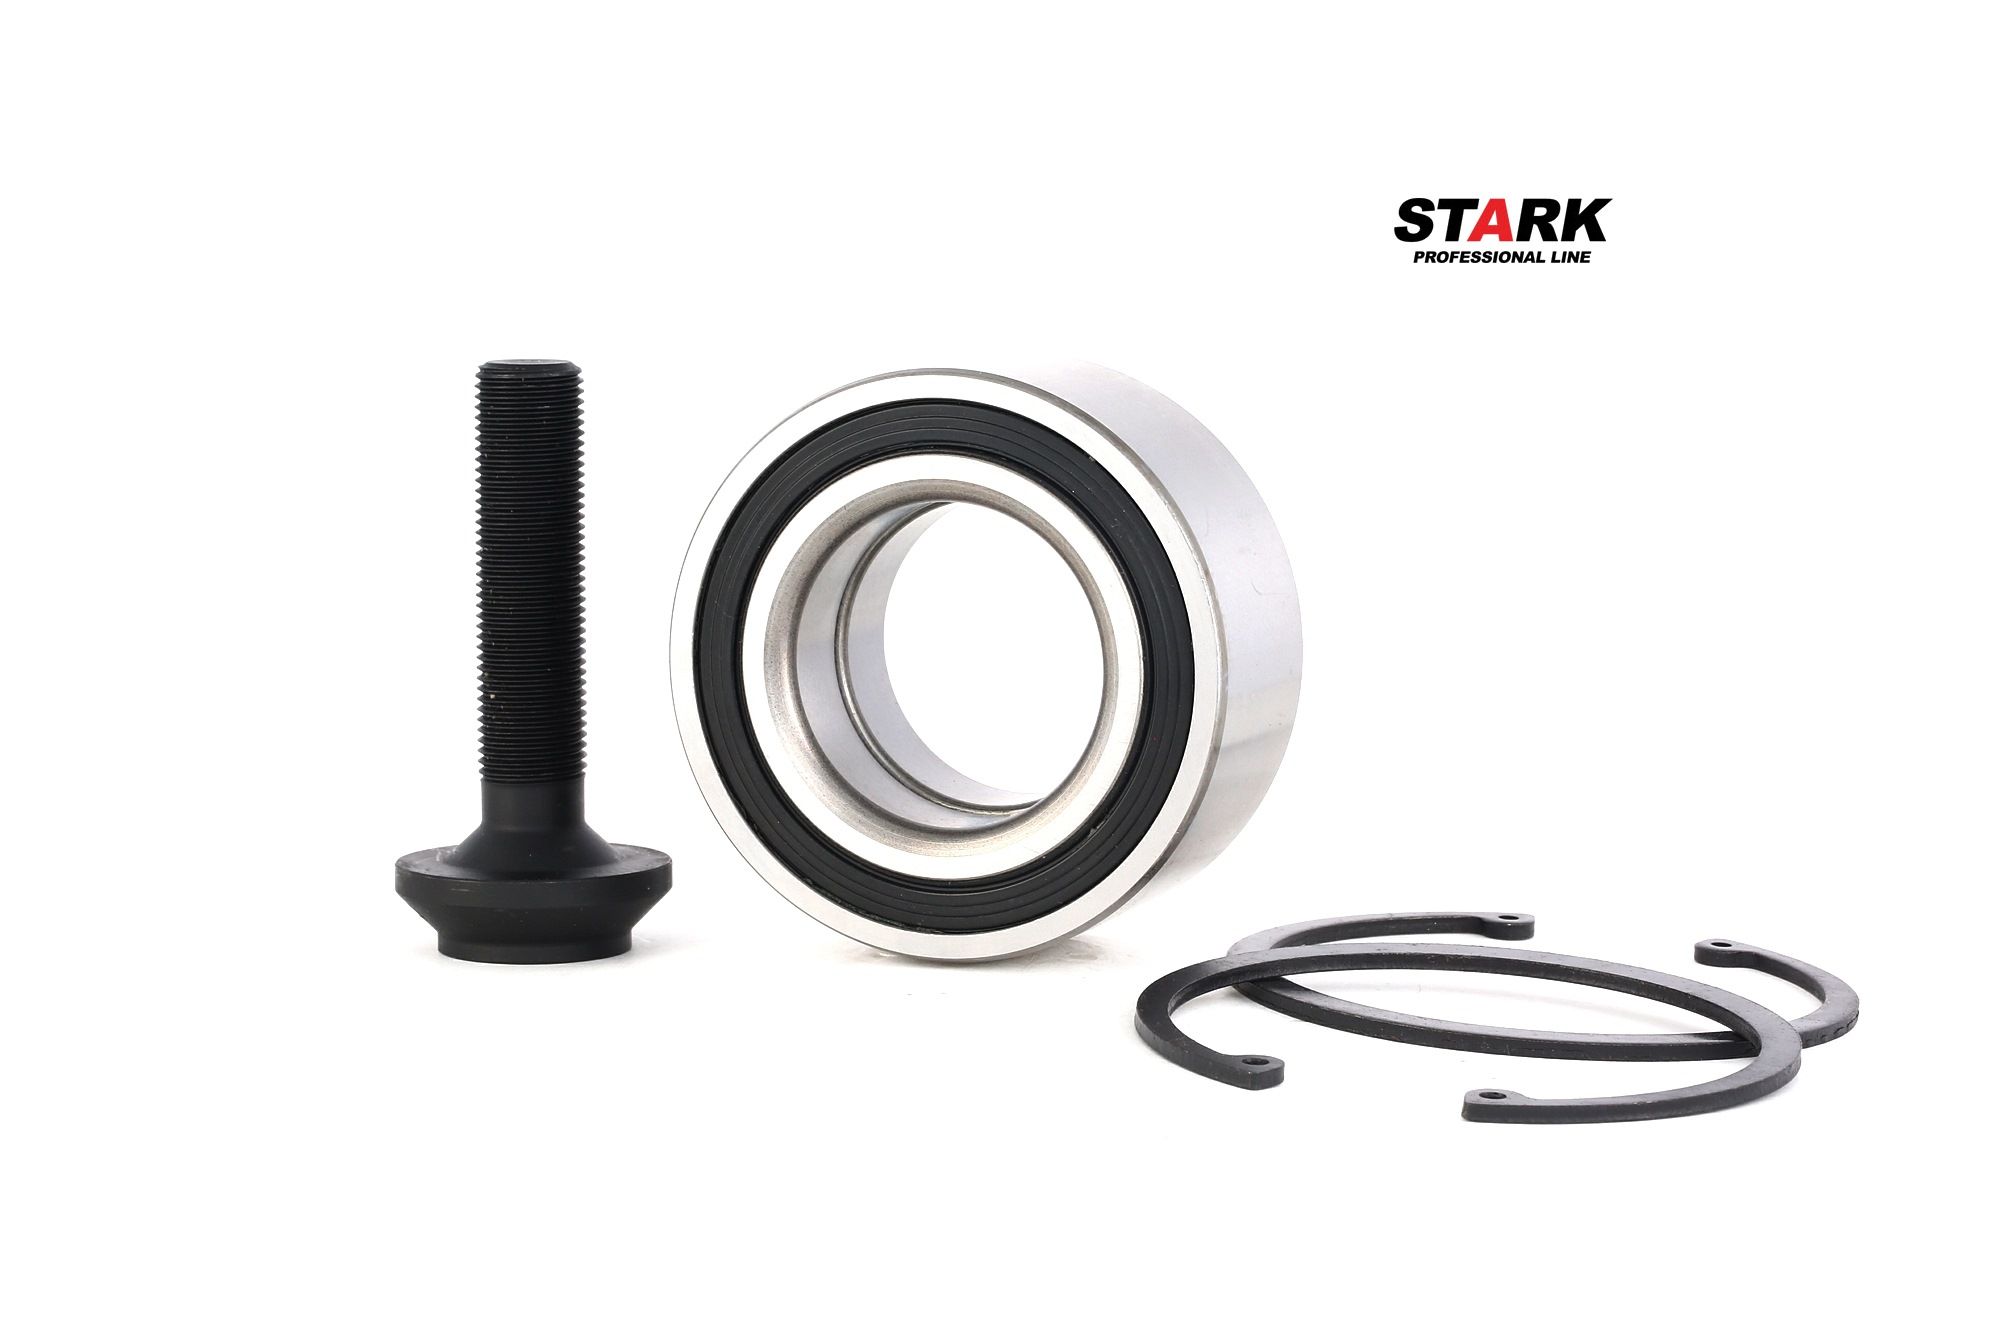 STARK SKWB-0180014 Wheel bearing kit Front axle both sides, Rear Axle both sides, without ABS sensor ring, 82 mm